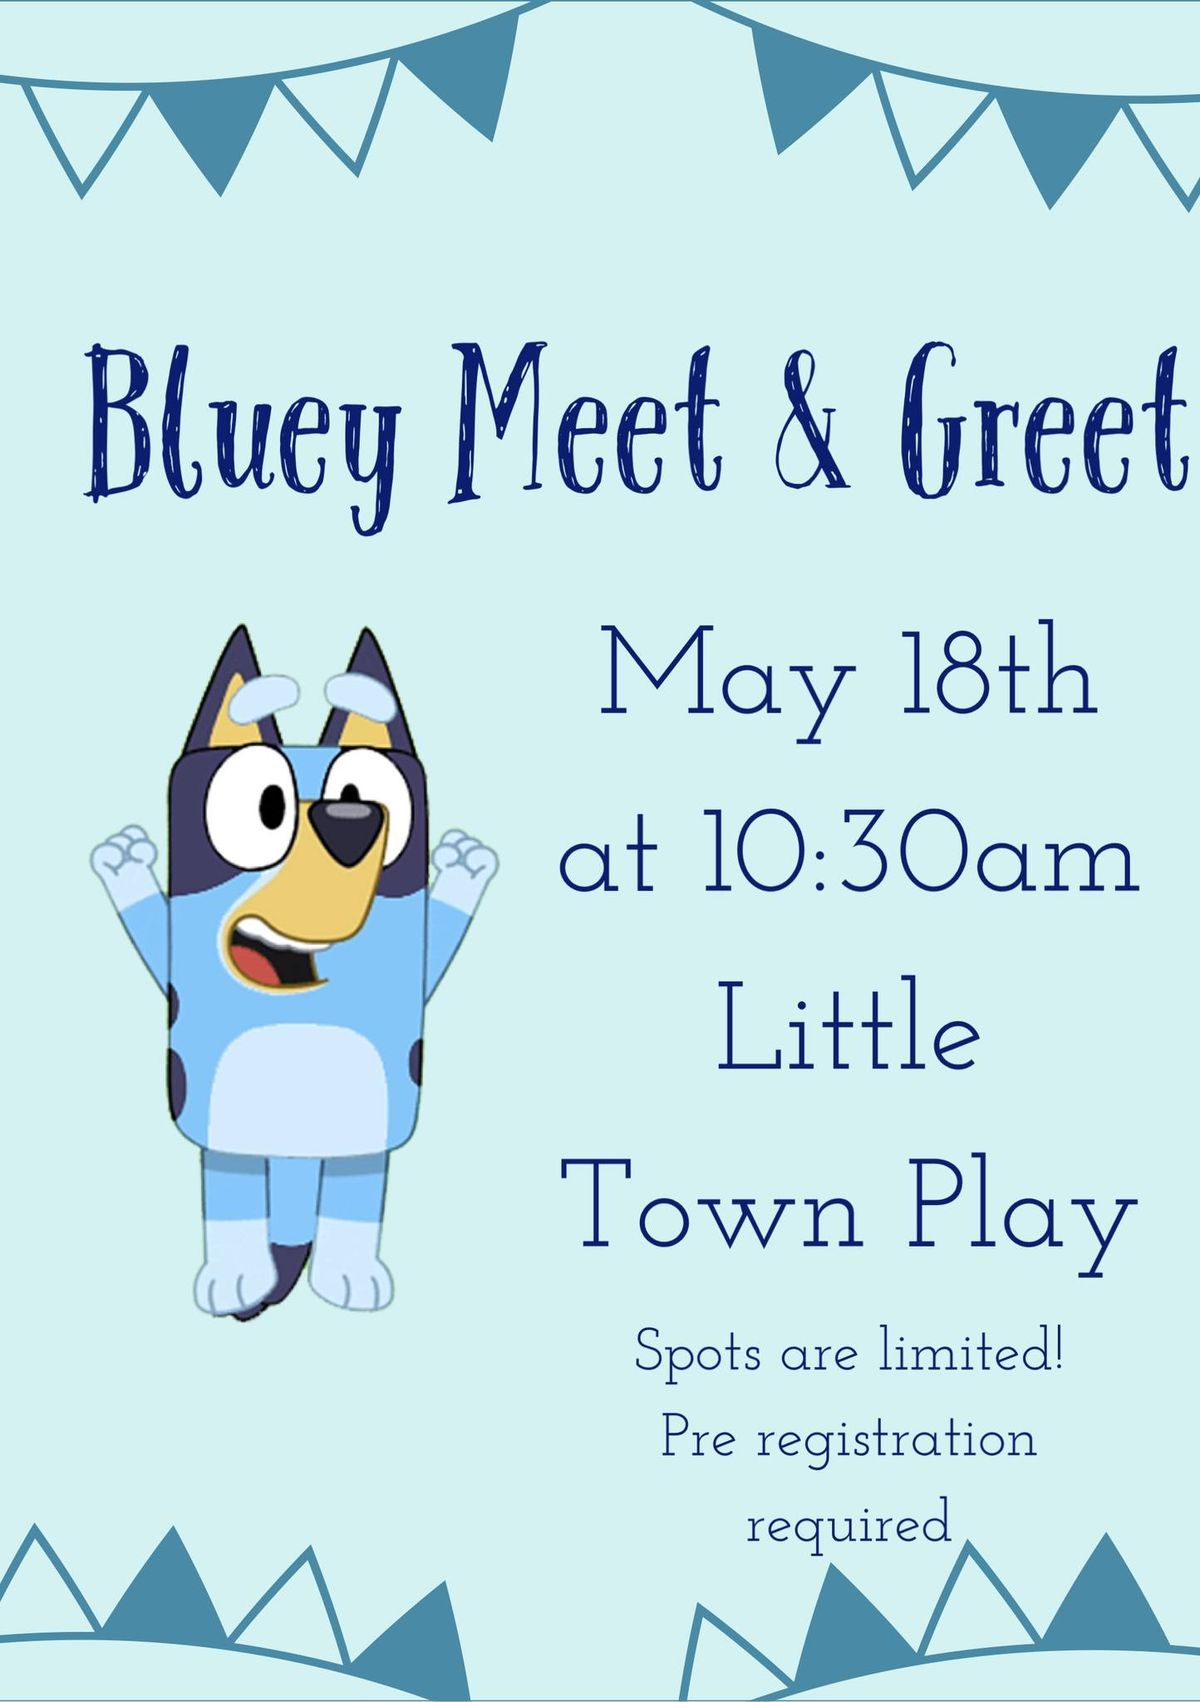 *SOLD OUT *Bluey Meet & Greet 